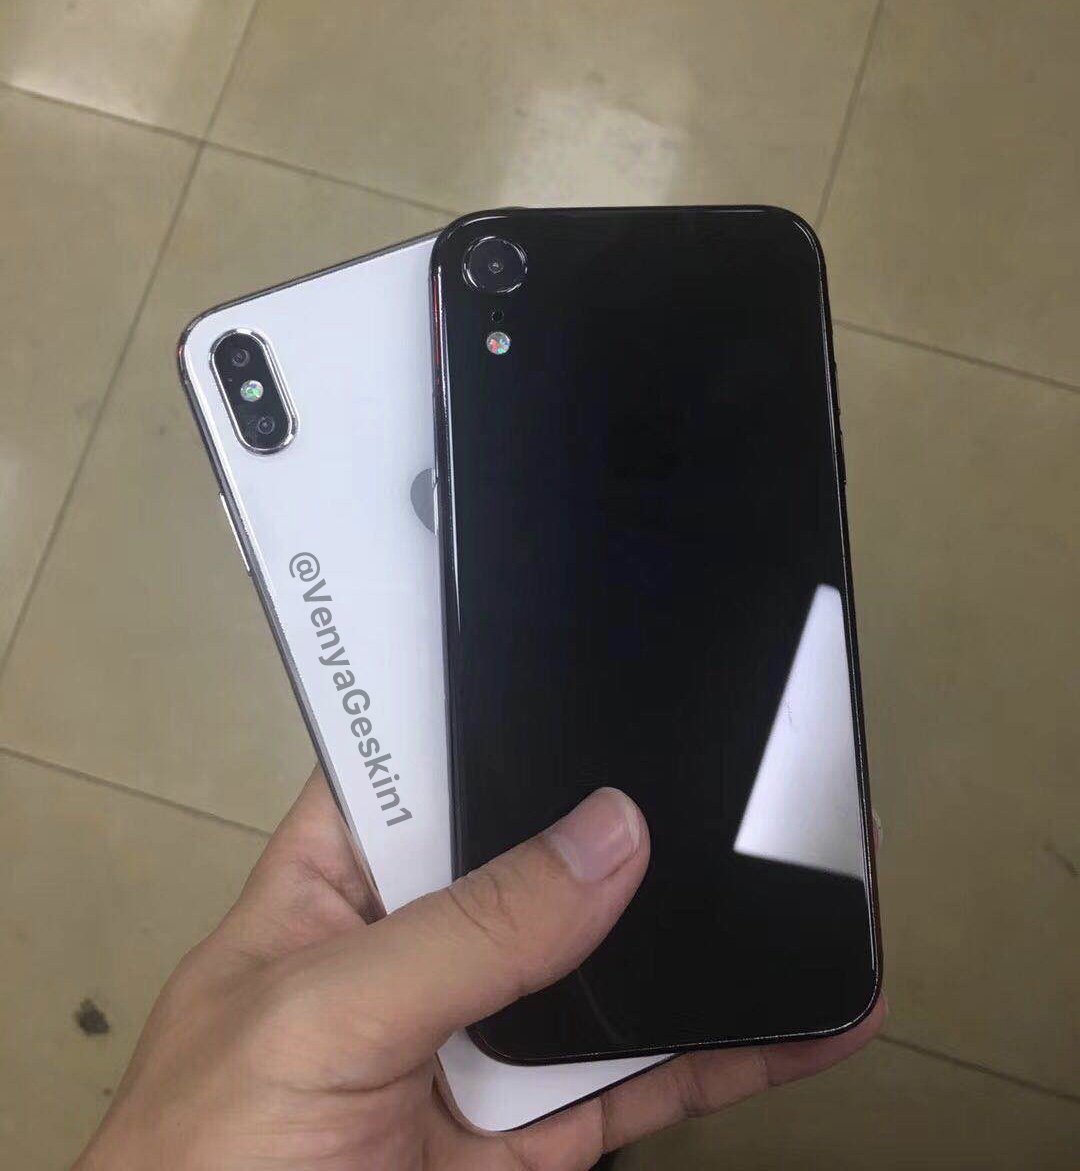 2018 iphone leak leaves little to the imagination photo gallery 522148 3